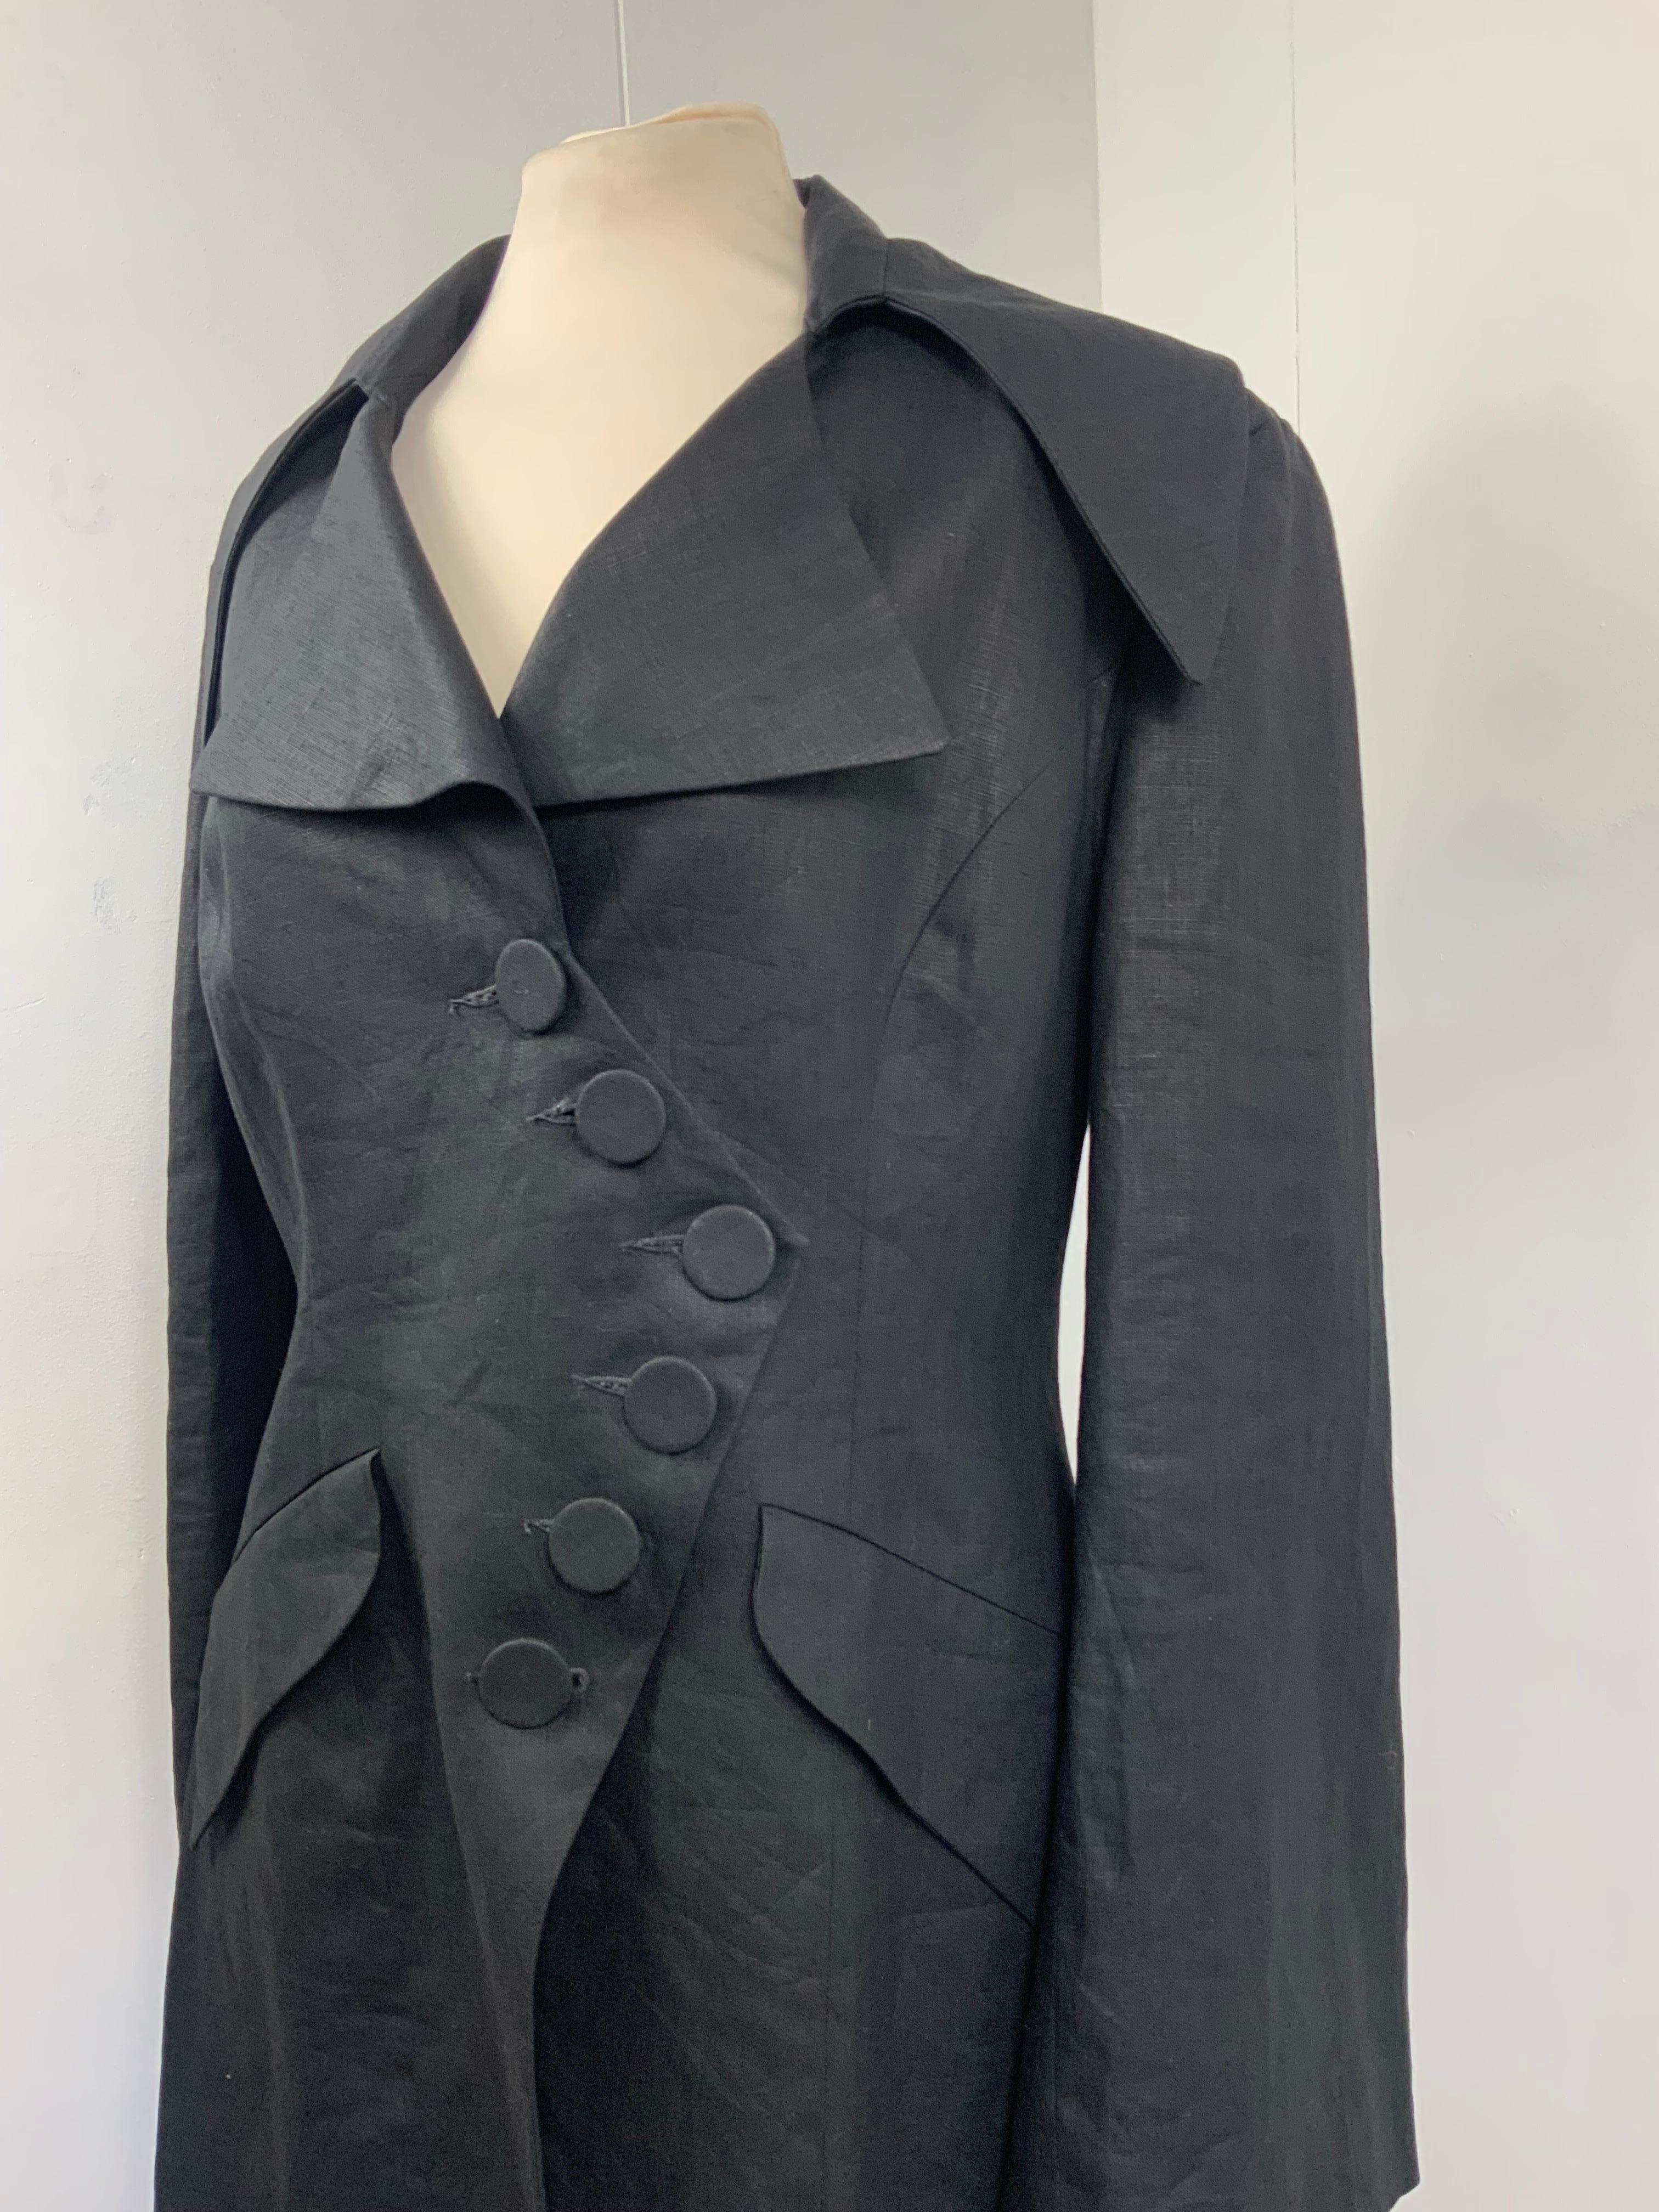 Comme Ca Des HALLES jacket.
Composition tag is missing.
It’s fully lined.
Size 2. It fits an Italian 44.
Shoulders 44 cm
Bust 44 cm
Length 82 cm
Sleeves 62 cm
Conditions: very good - it shows normal use signs.